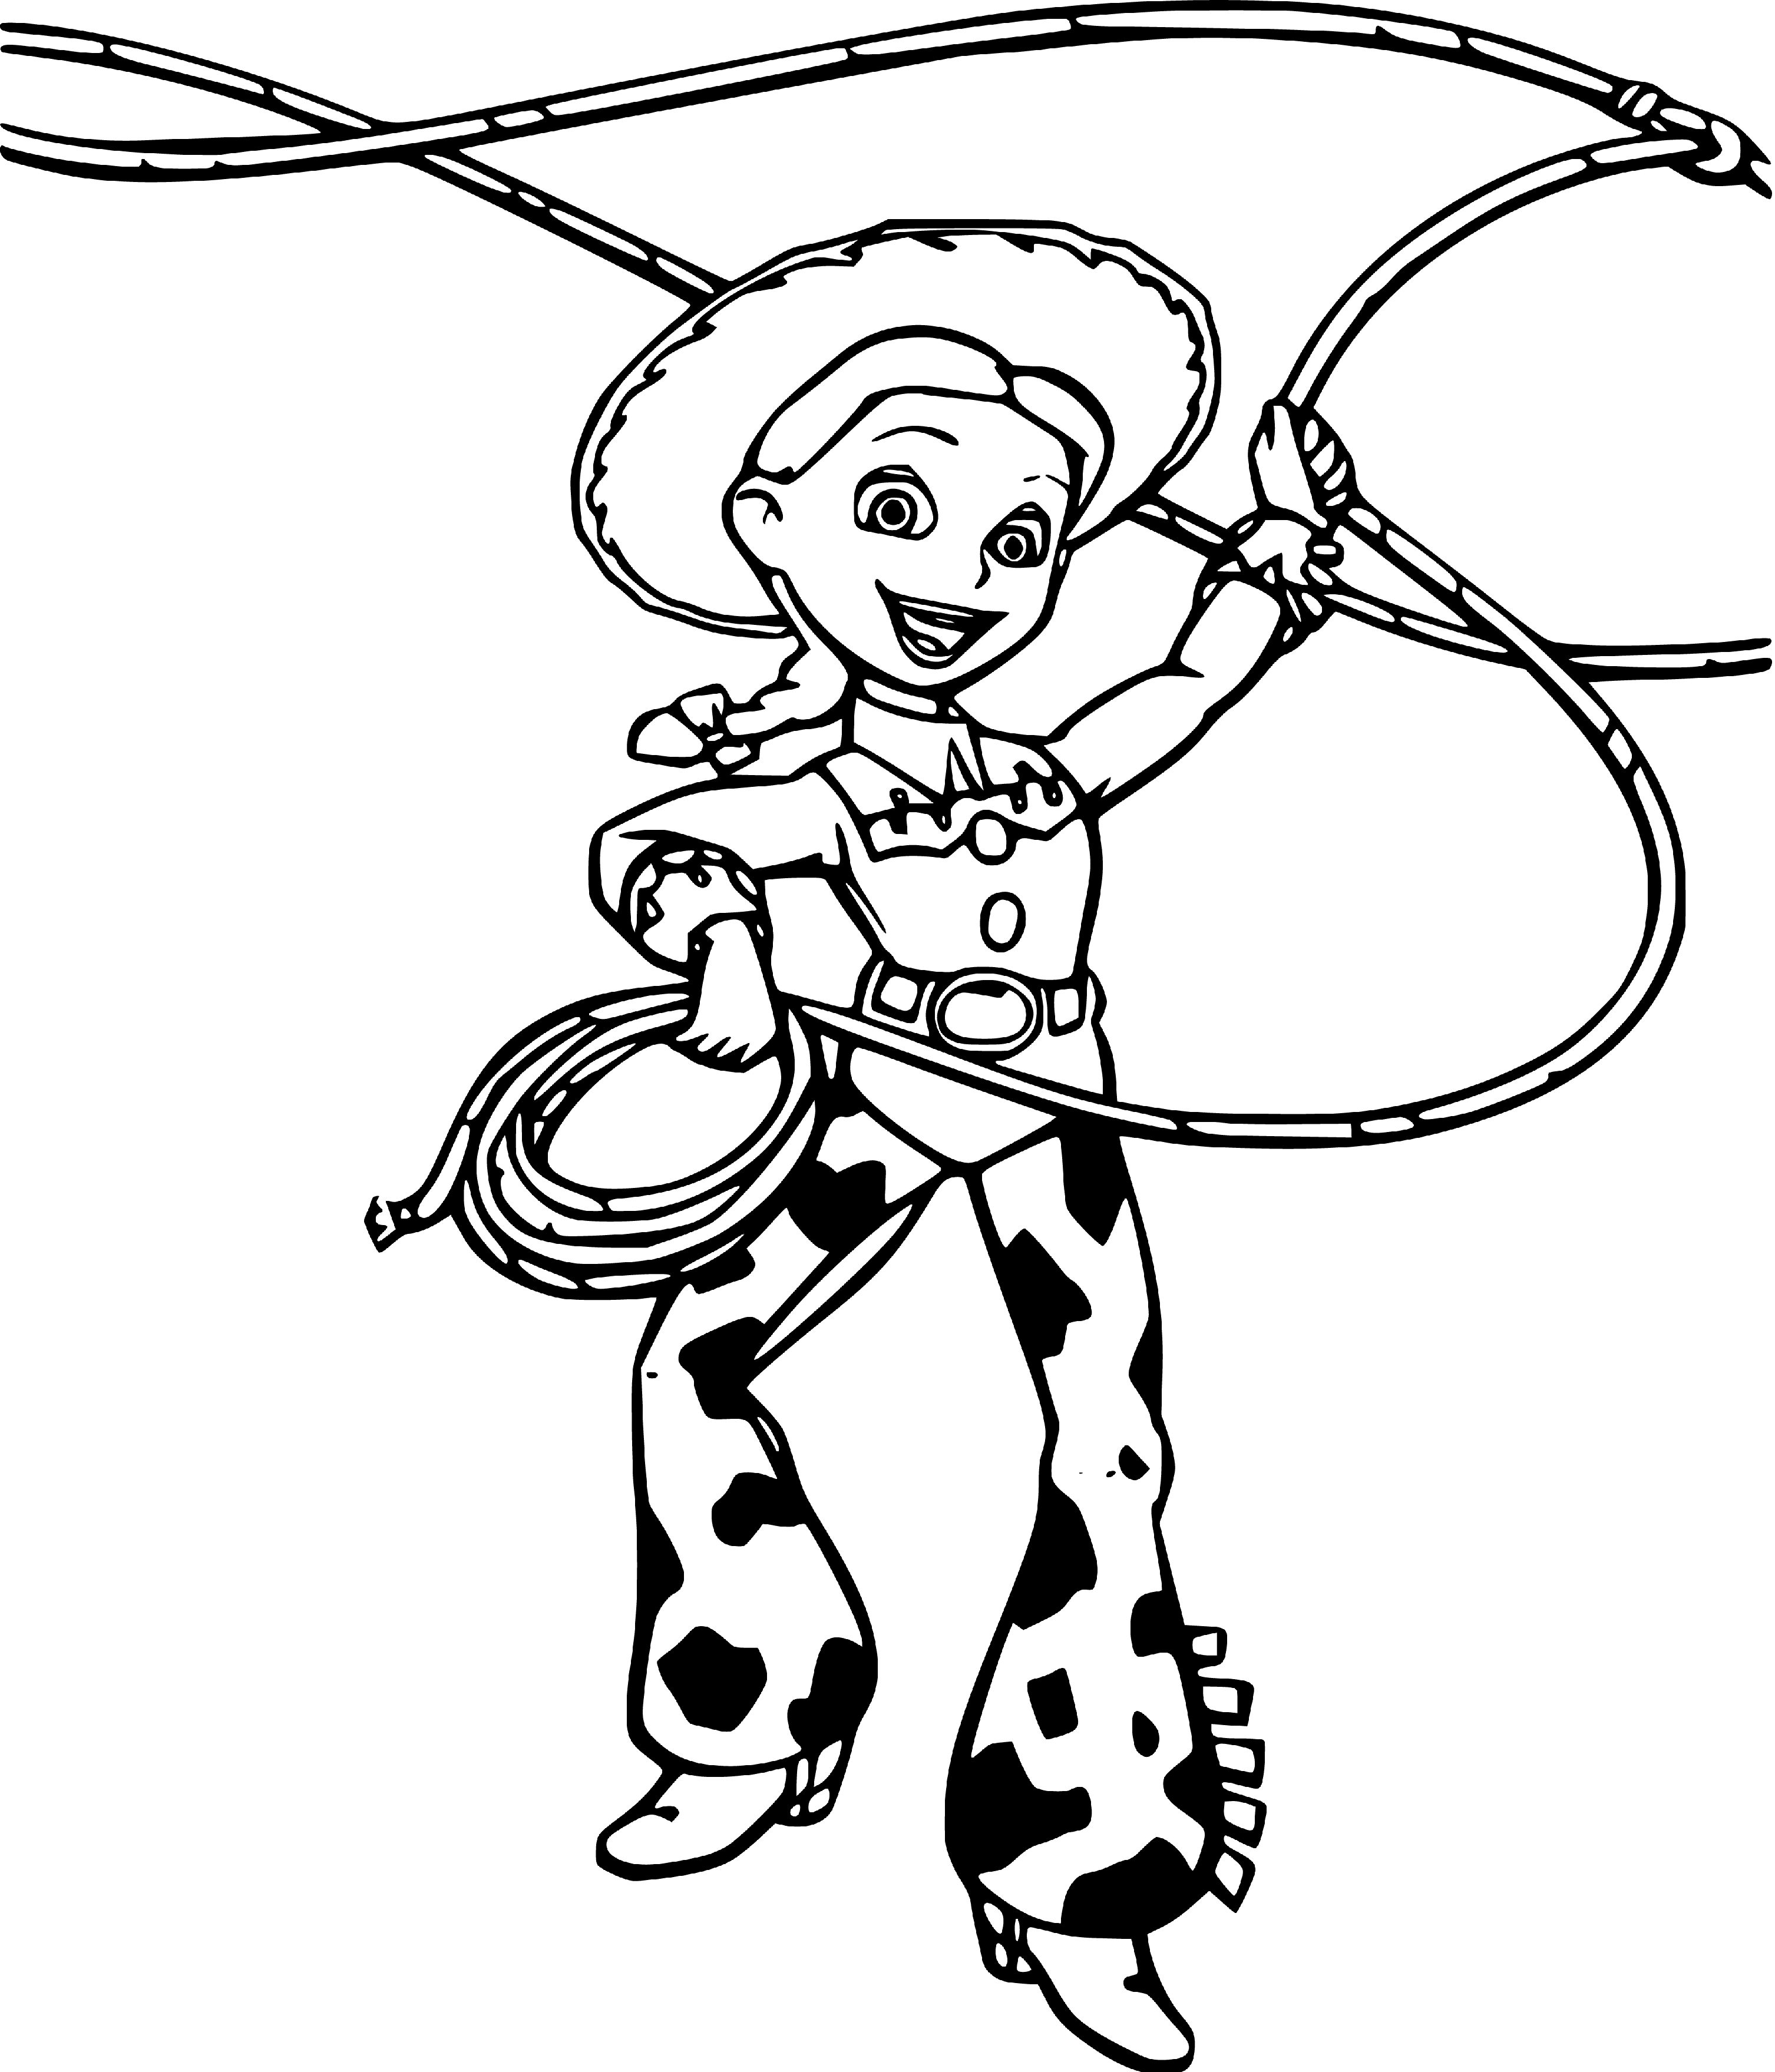 Printable Jessie  to Color Coloring Page for kids.